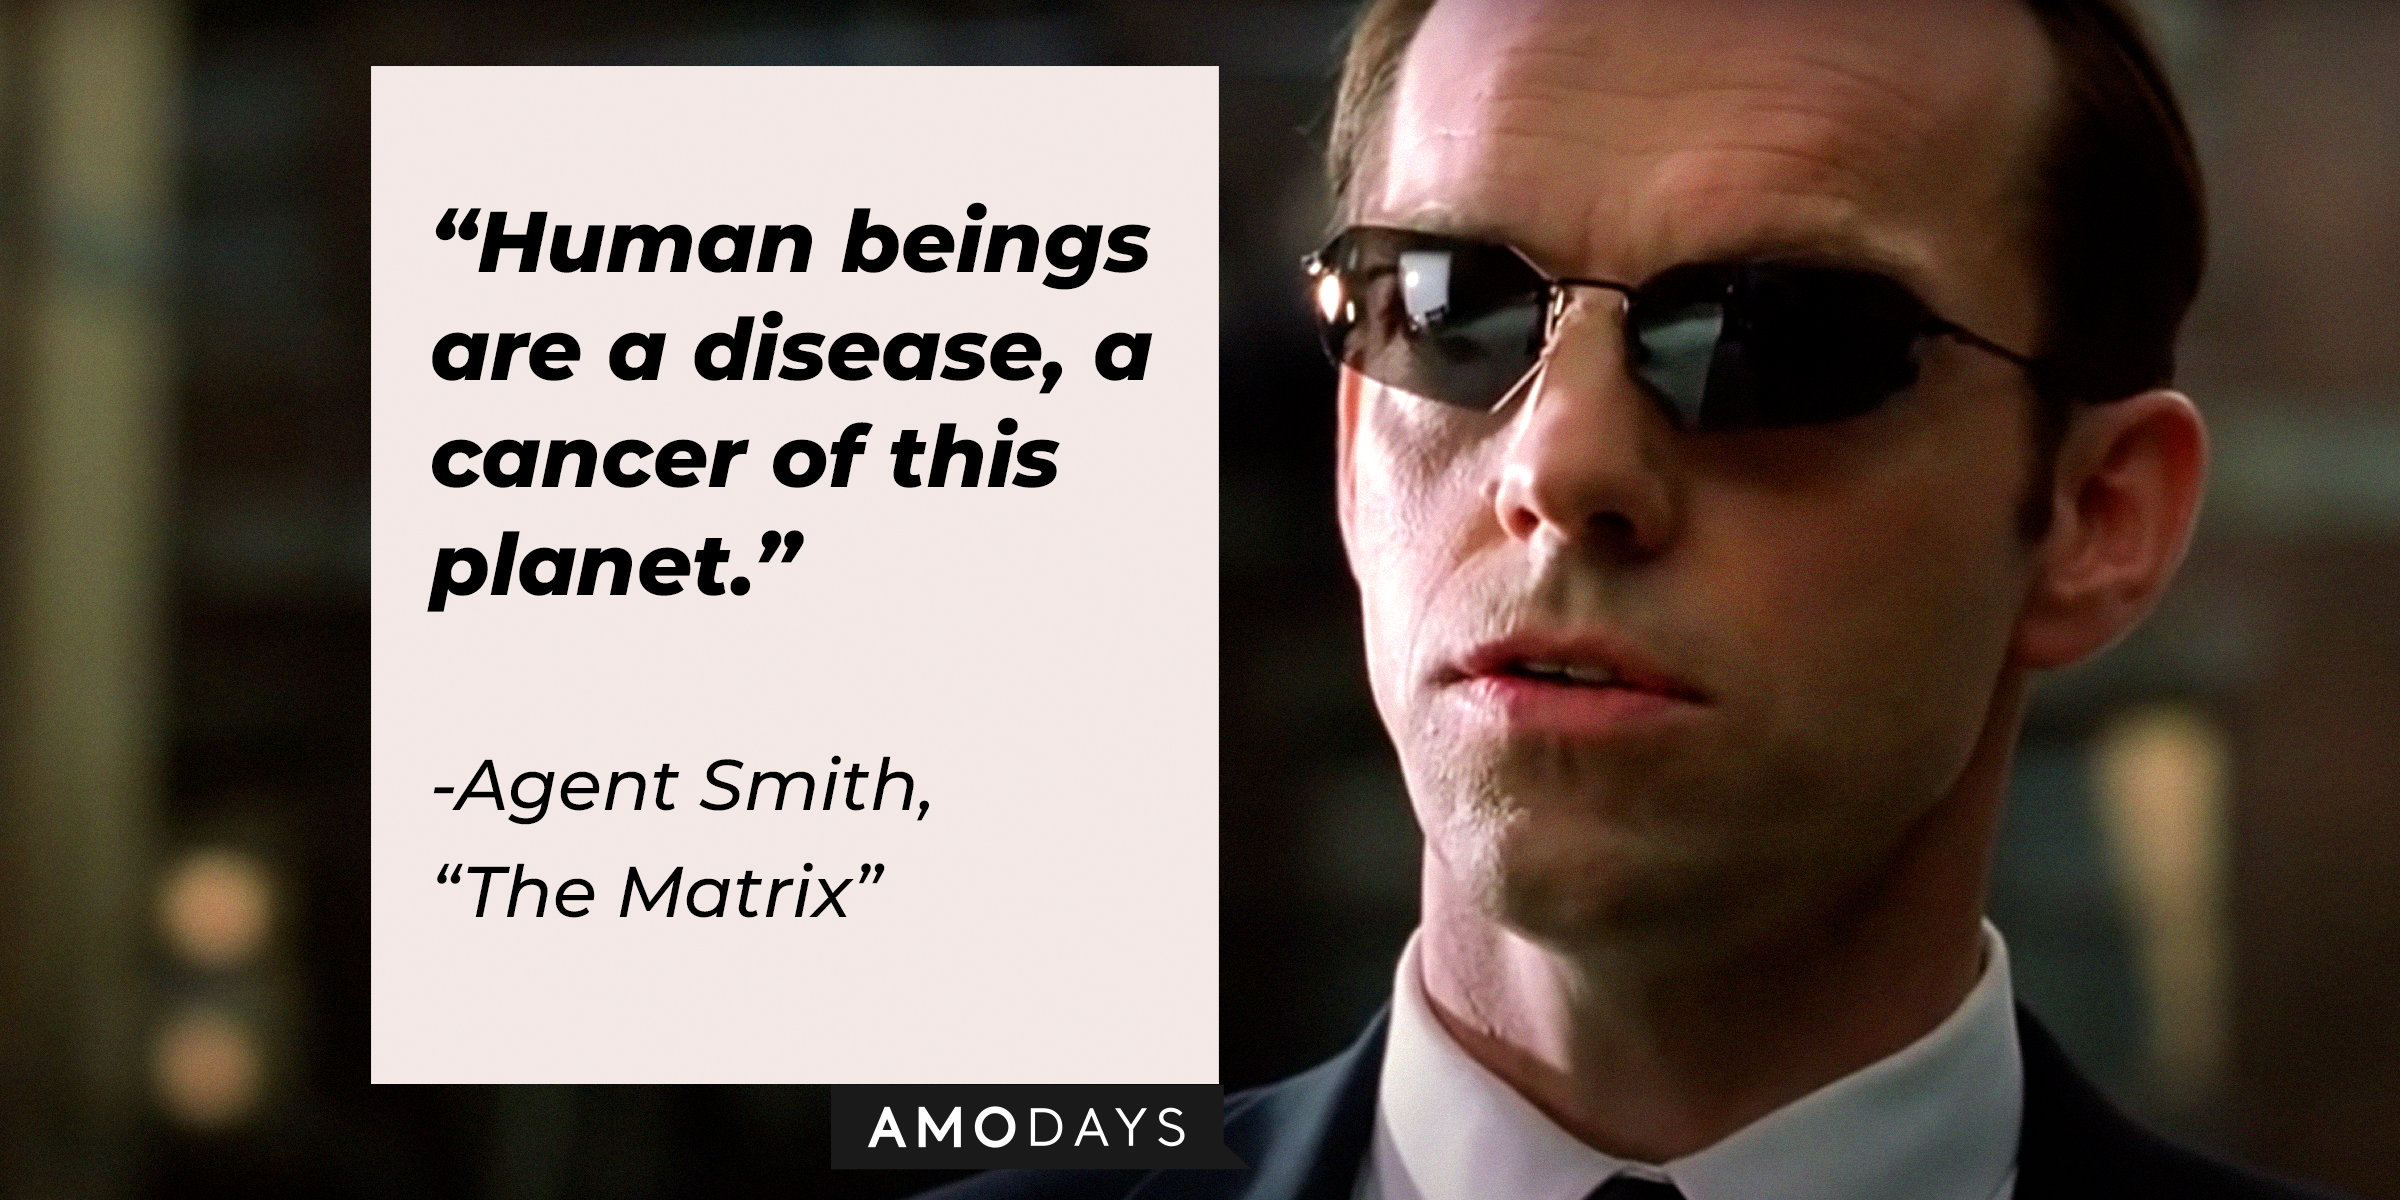 Agent Smith with his quote: "Human beings are a disease, a cancer of this planet." | Source: Facebook.com/TheMatrixMovie